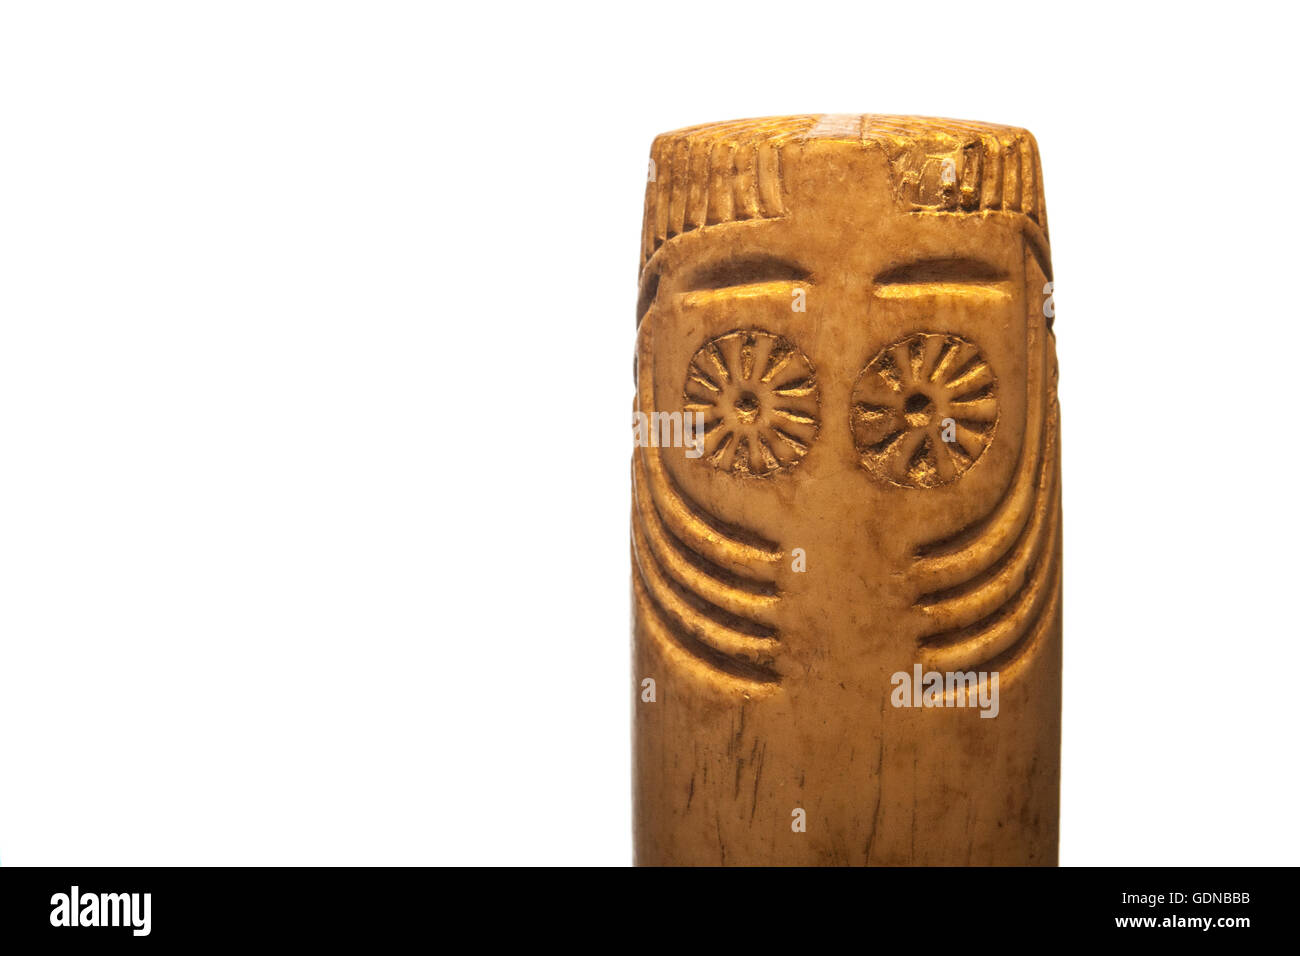 Prehistorical Eye idol belong to Chalcolithic period, 3rd millennium BC. Isolated over white background Stock Photo